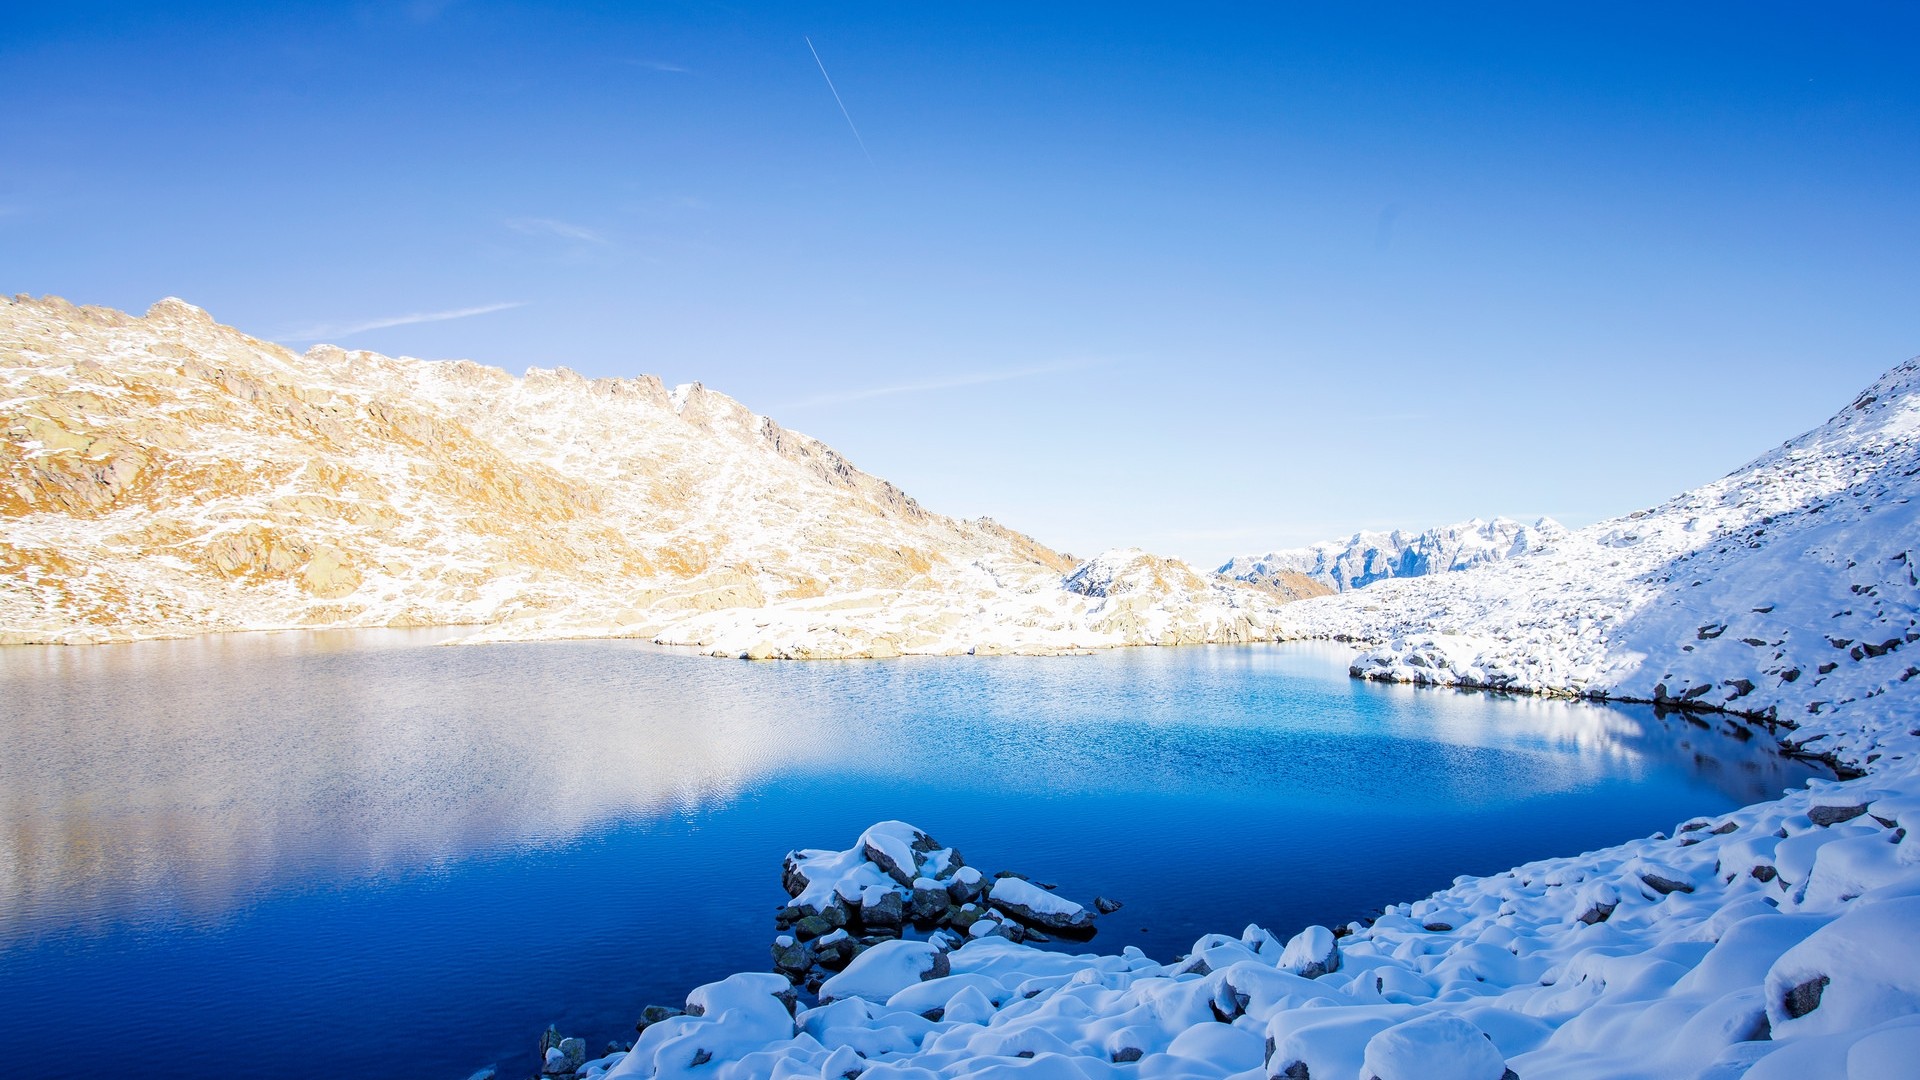 General 1920x1080 winter lake mountains landscape snow nature cold ice outdoors